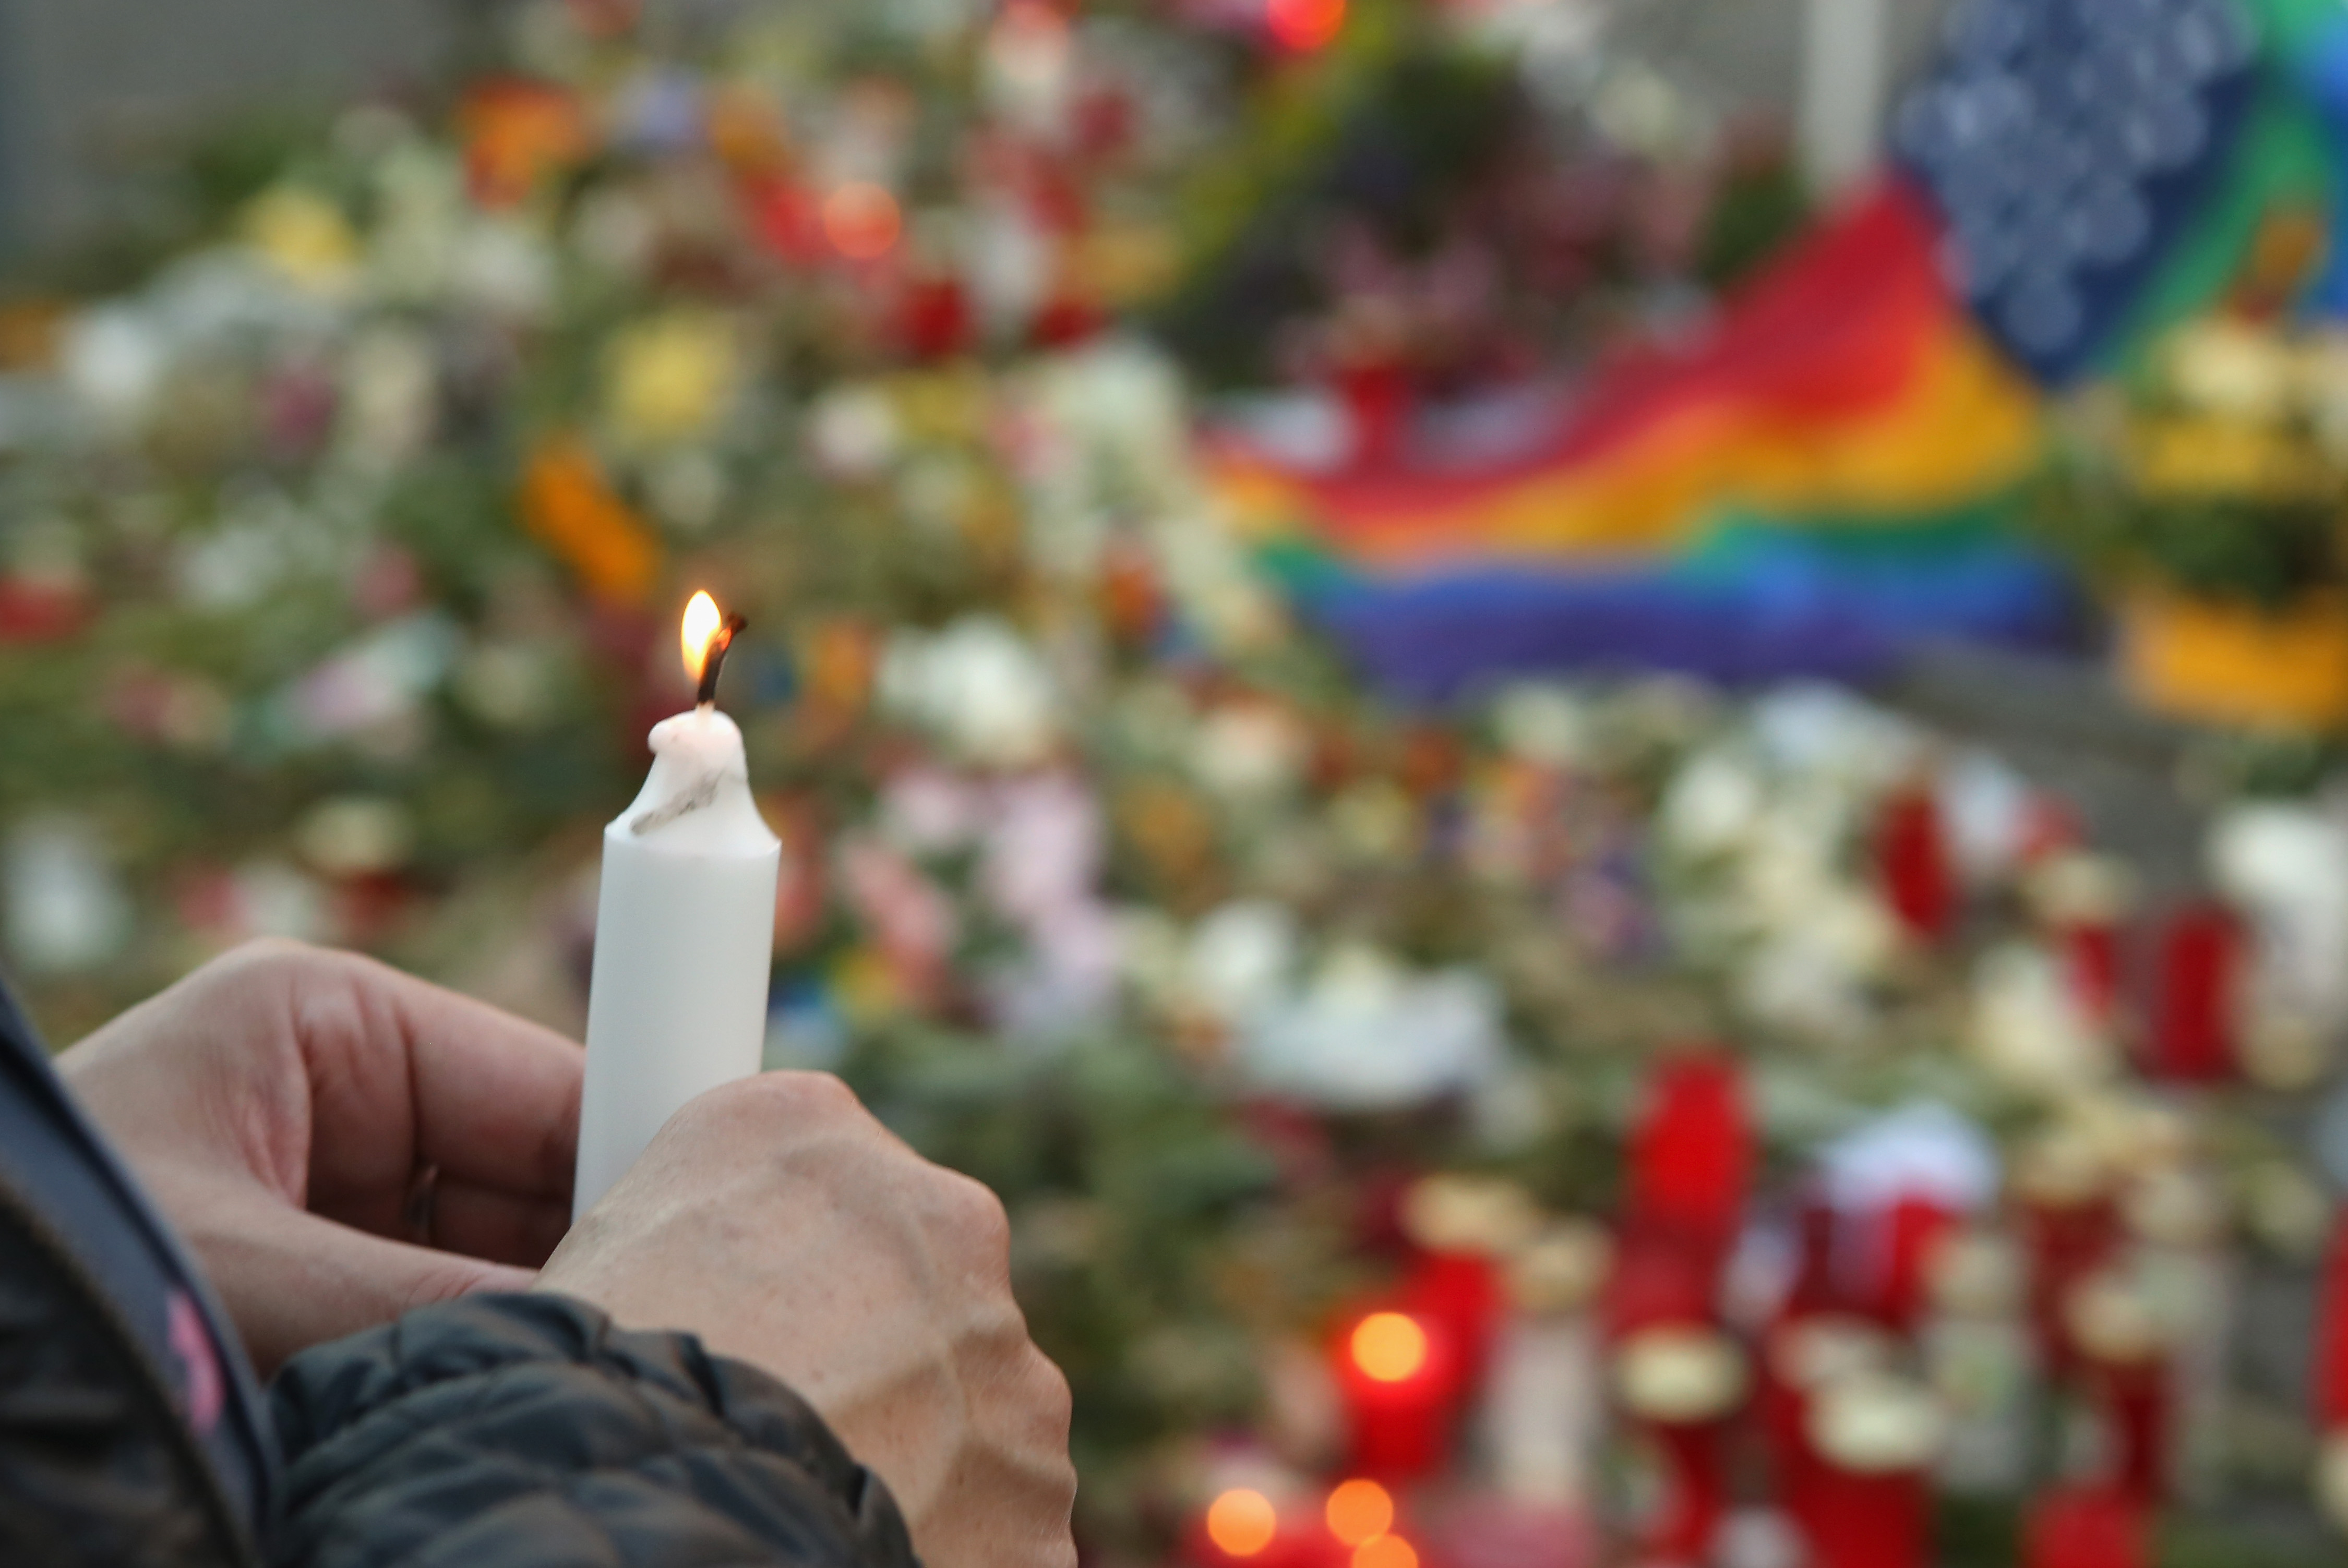 A mourner attends a vigil for victims of a shooting at a gay nightclub in Orlando, Florida nearly a week earlier, in front of the United States embassy on June 18, 2016 in Berlin, Germany. Fifty people were killed and at least as many injured during a Latin music event at the Pulse club in the worst terror attack in the U.S. since 9/11. The American-born gunman had pledged allegiance to ISIS, though officials have yet to find conclusive evidence of his having any direct connection with foreign extremists. The incident has added fuel to the ongoing debate about gun control in the country. 